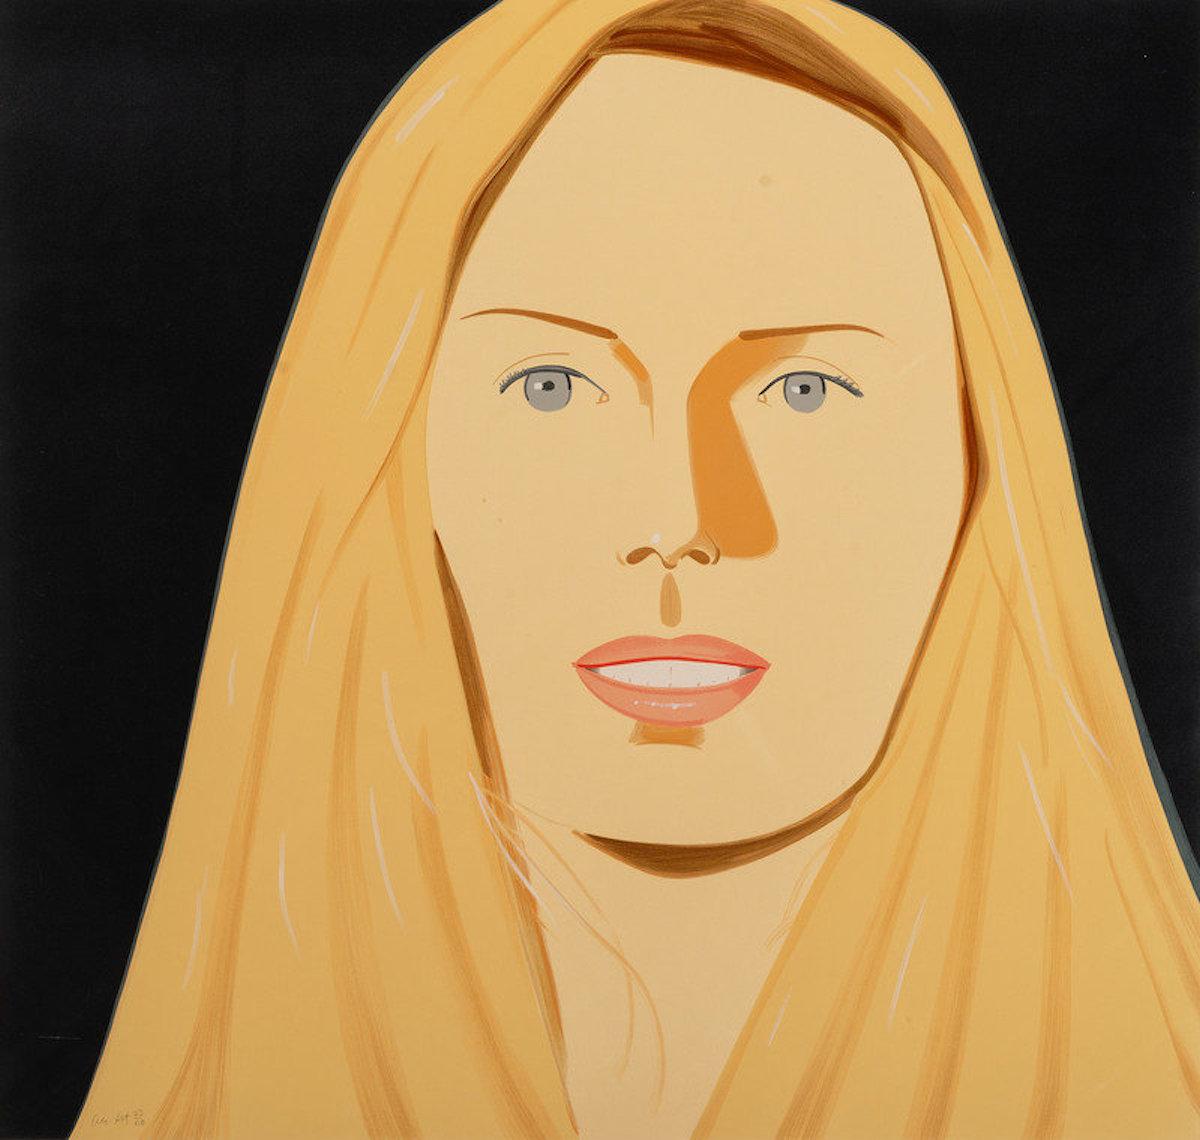 ALEX KATZ (1927-Present)

32-color silkscreen on 2-ply museum board signed and numbered 23/60 in pencil. Published by Lococo Fine Art Publisher, St. Louis, Missouri.

